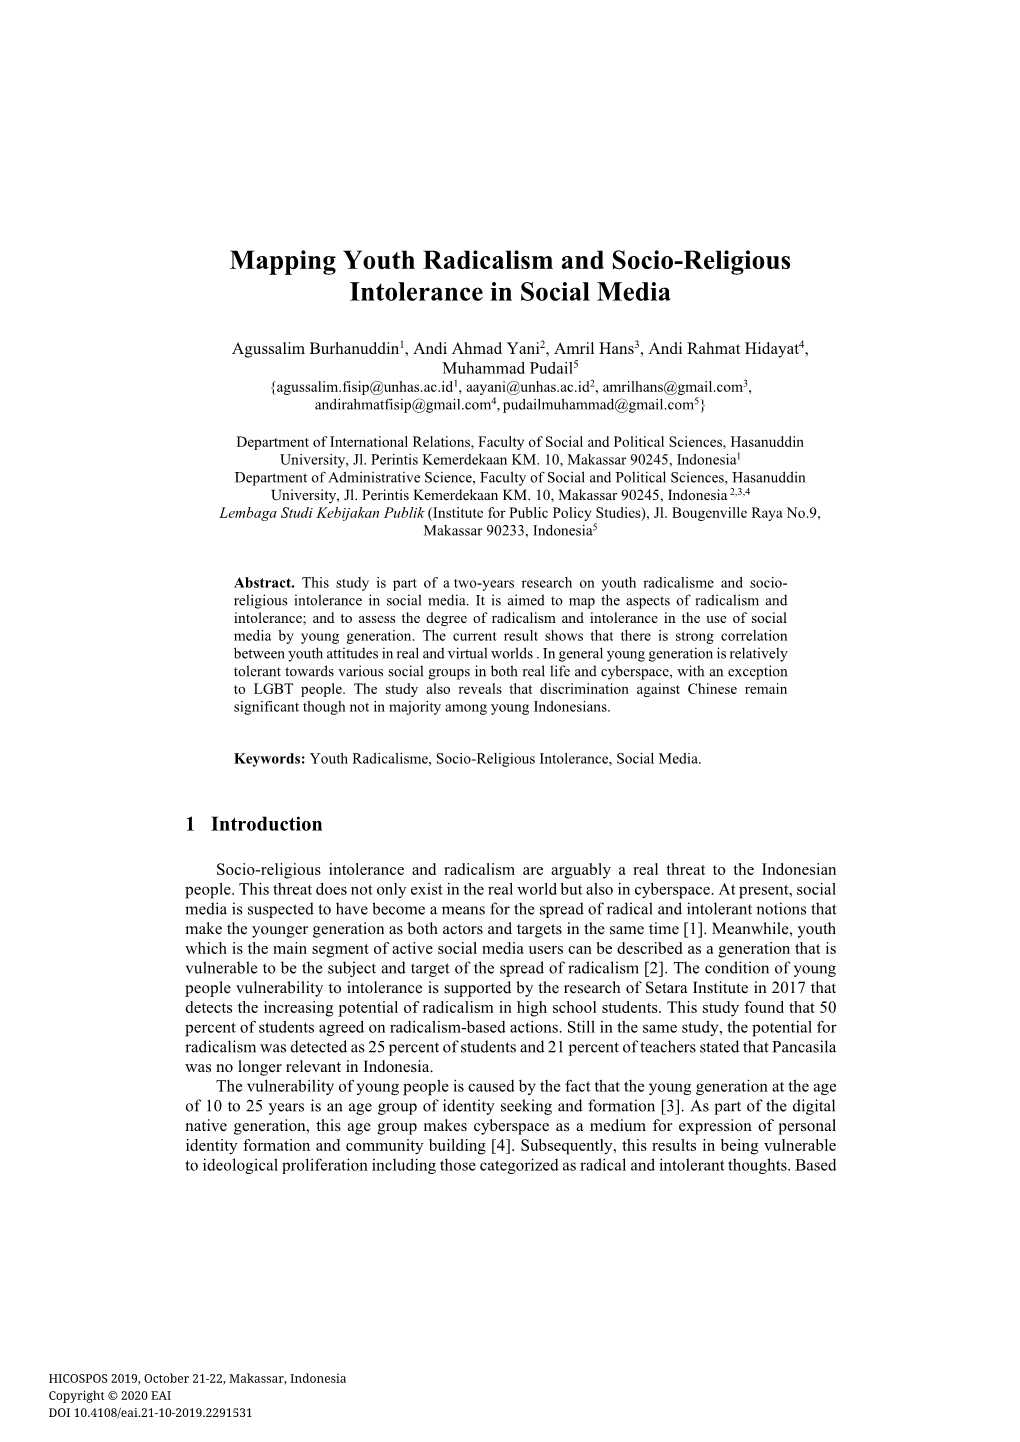 Mapping Youth Radicalism and Socio-Religious Intolerance in Social Media